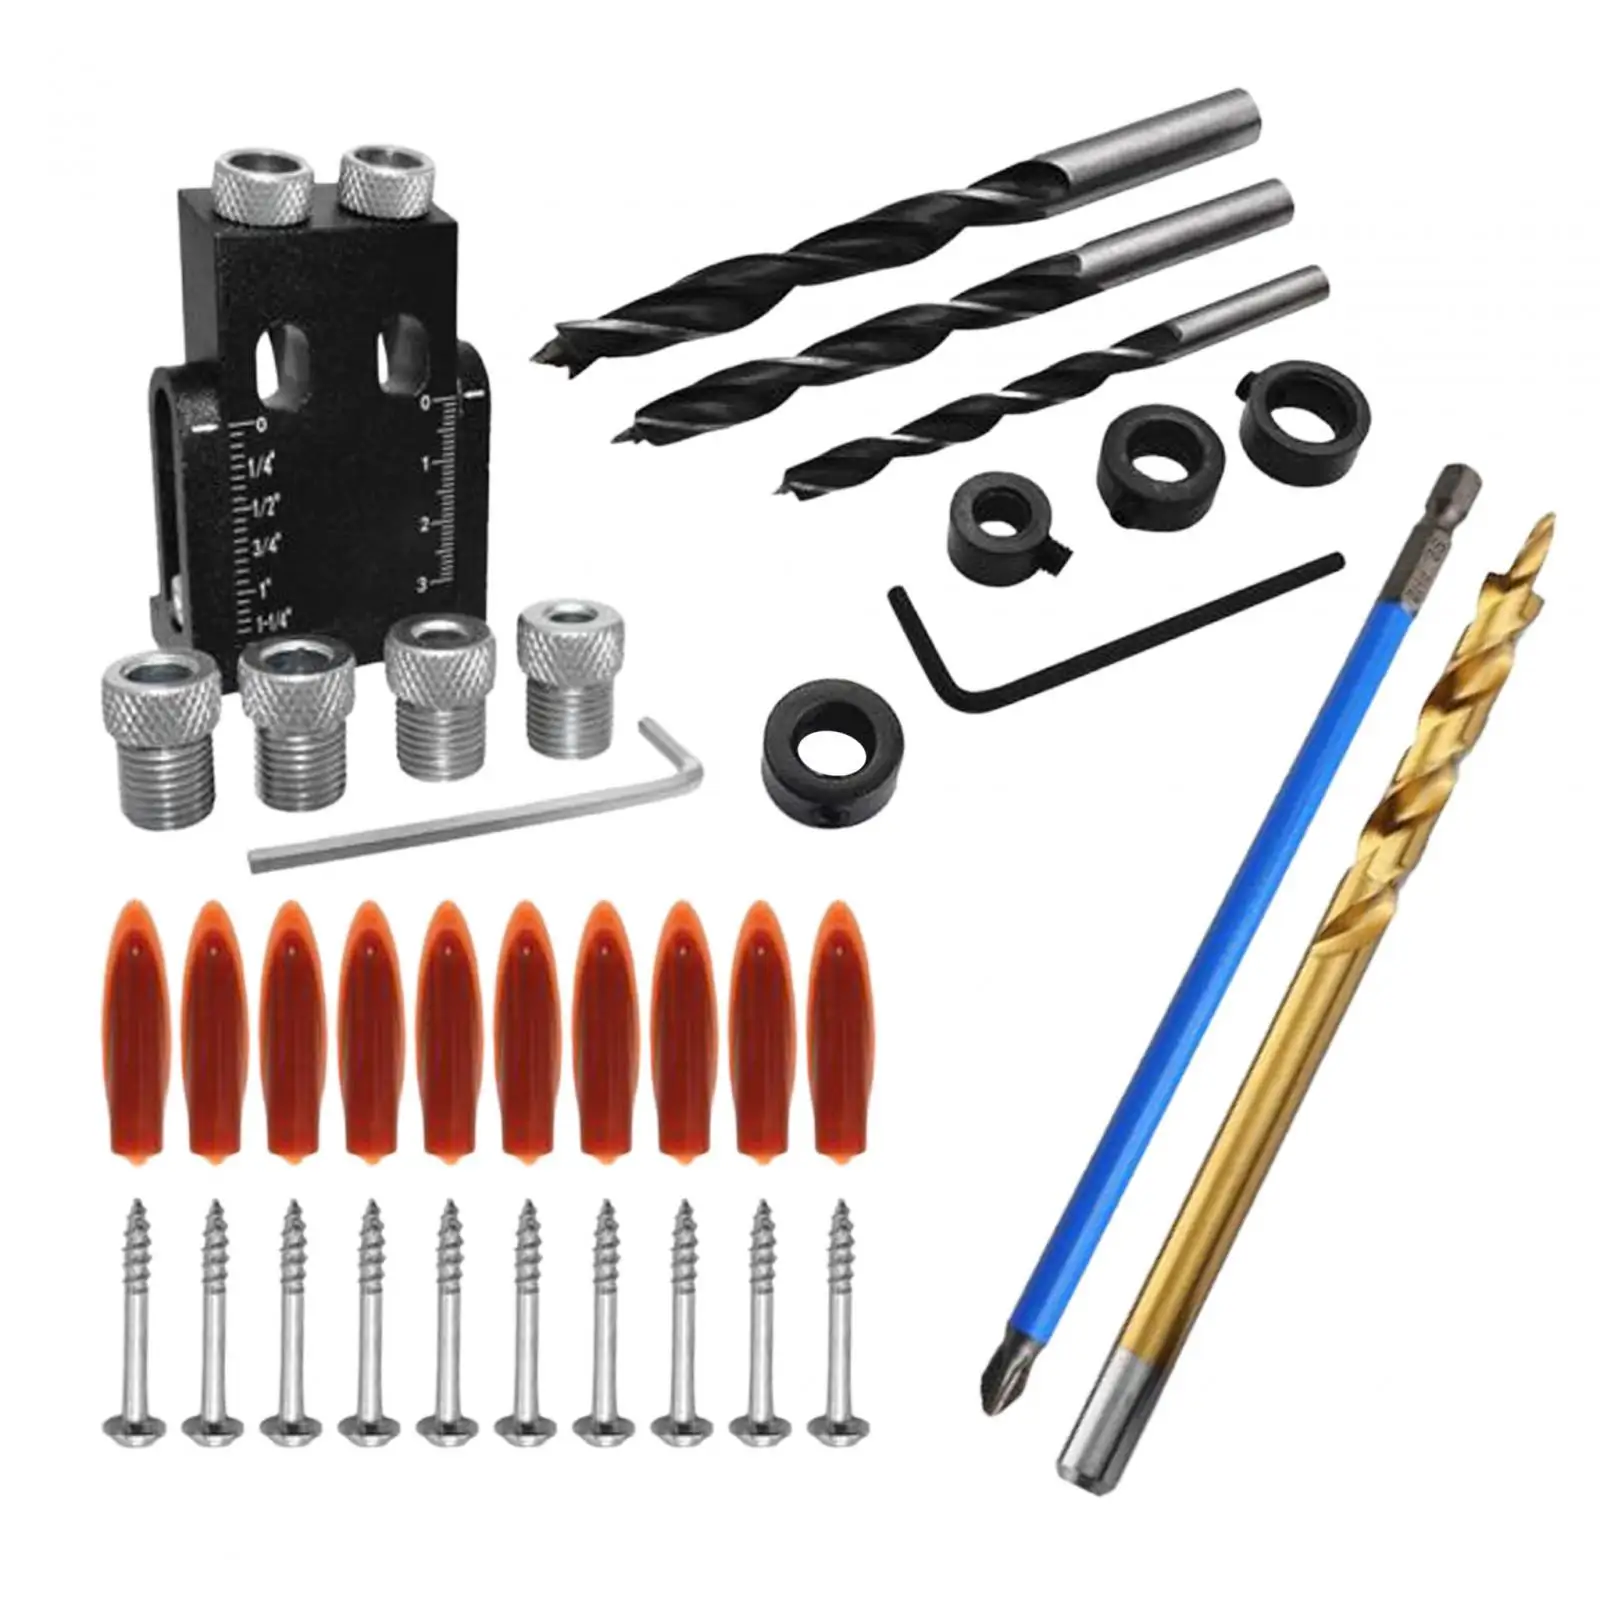 Pocket Hole Jig Kit Jig Drill Drill Jig Hole Drill Guide DIY Woodworking for Deck Cables Railing Joinery Work